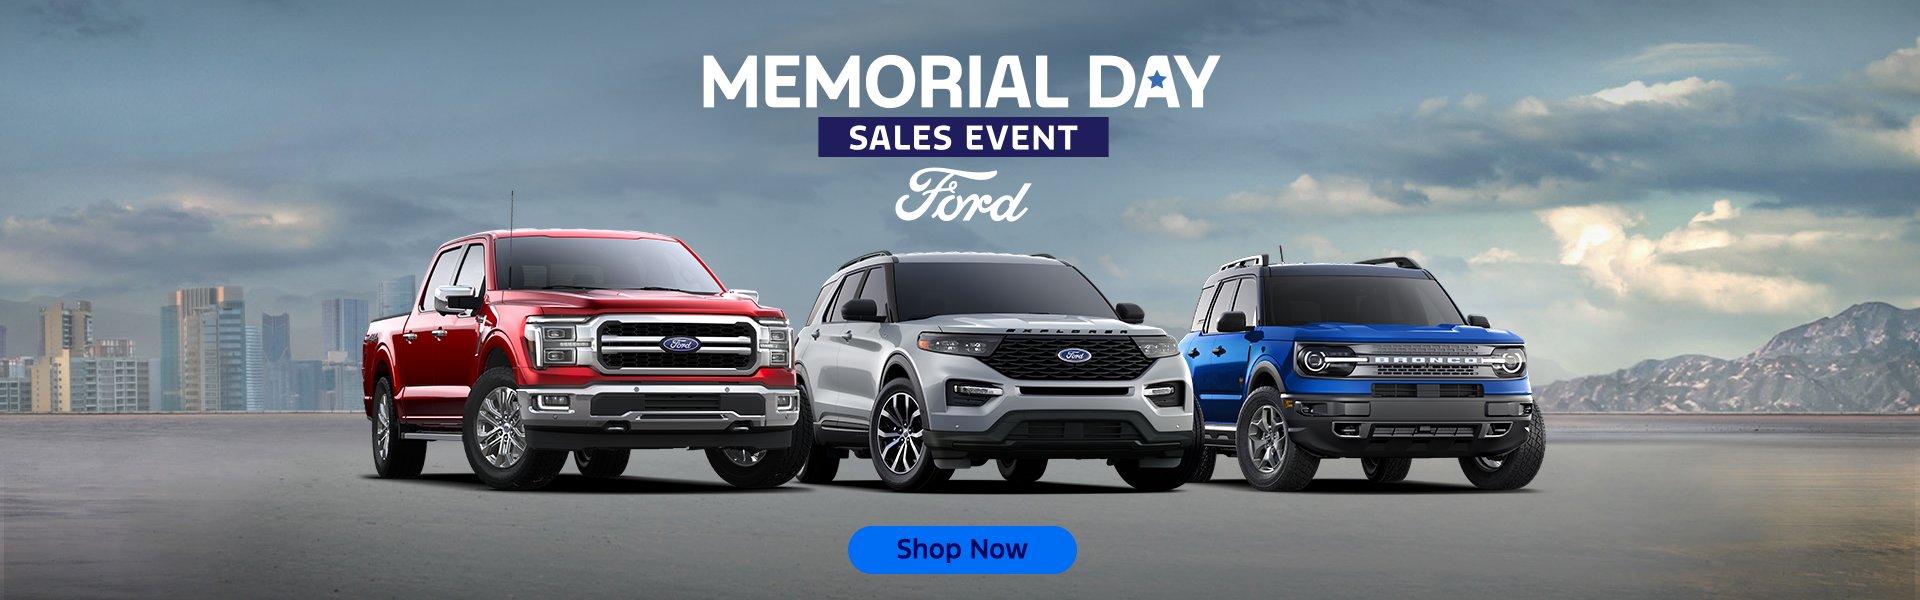 Ford Memorial Day Sales Event